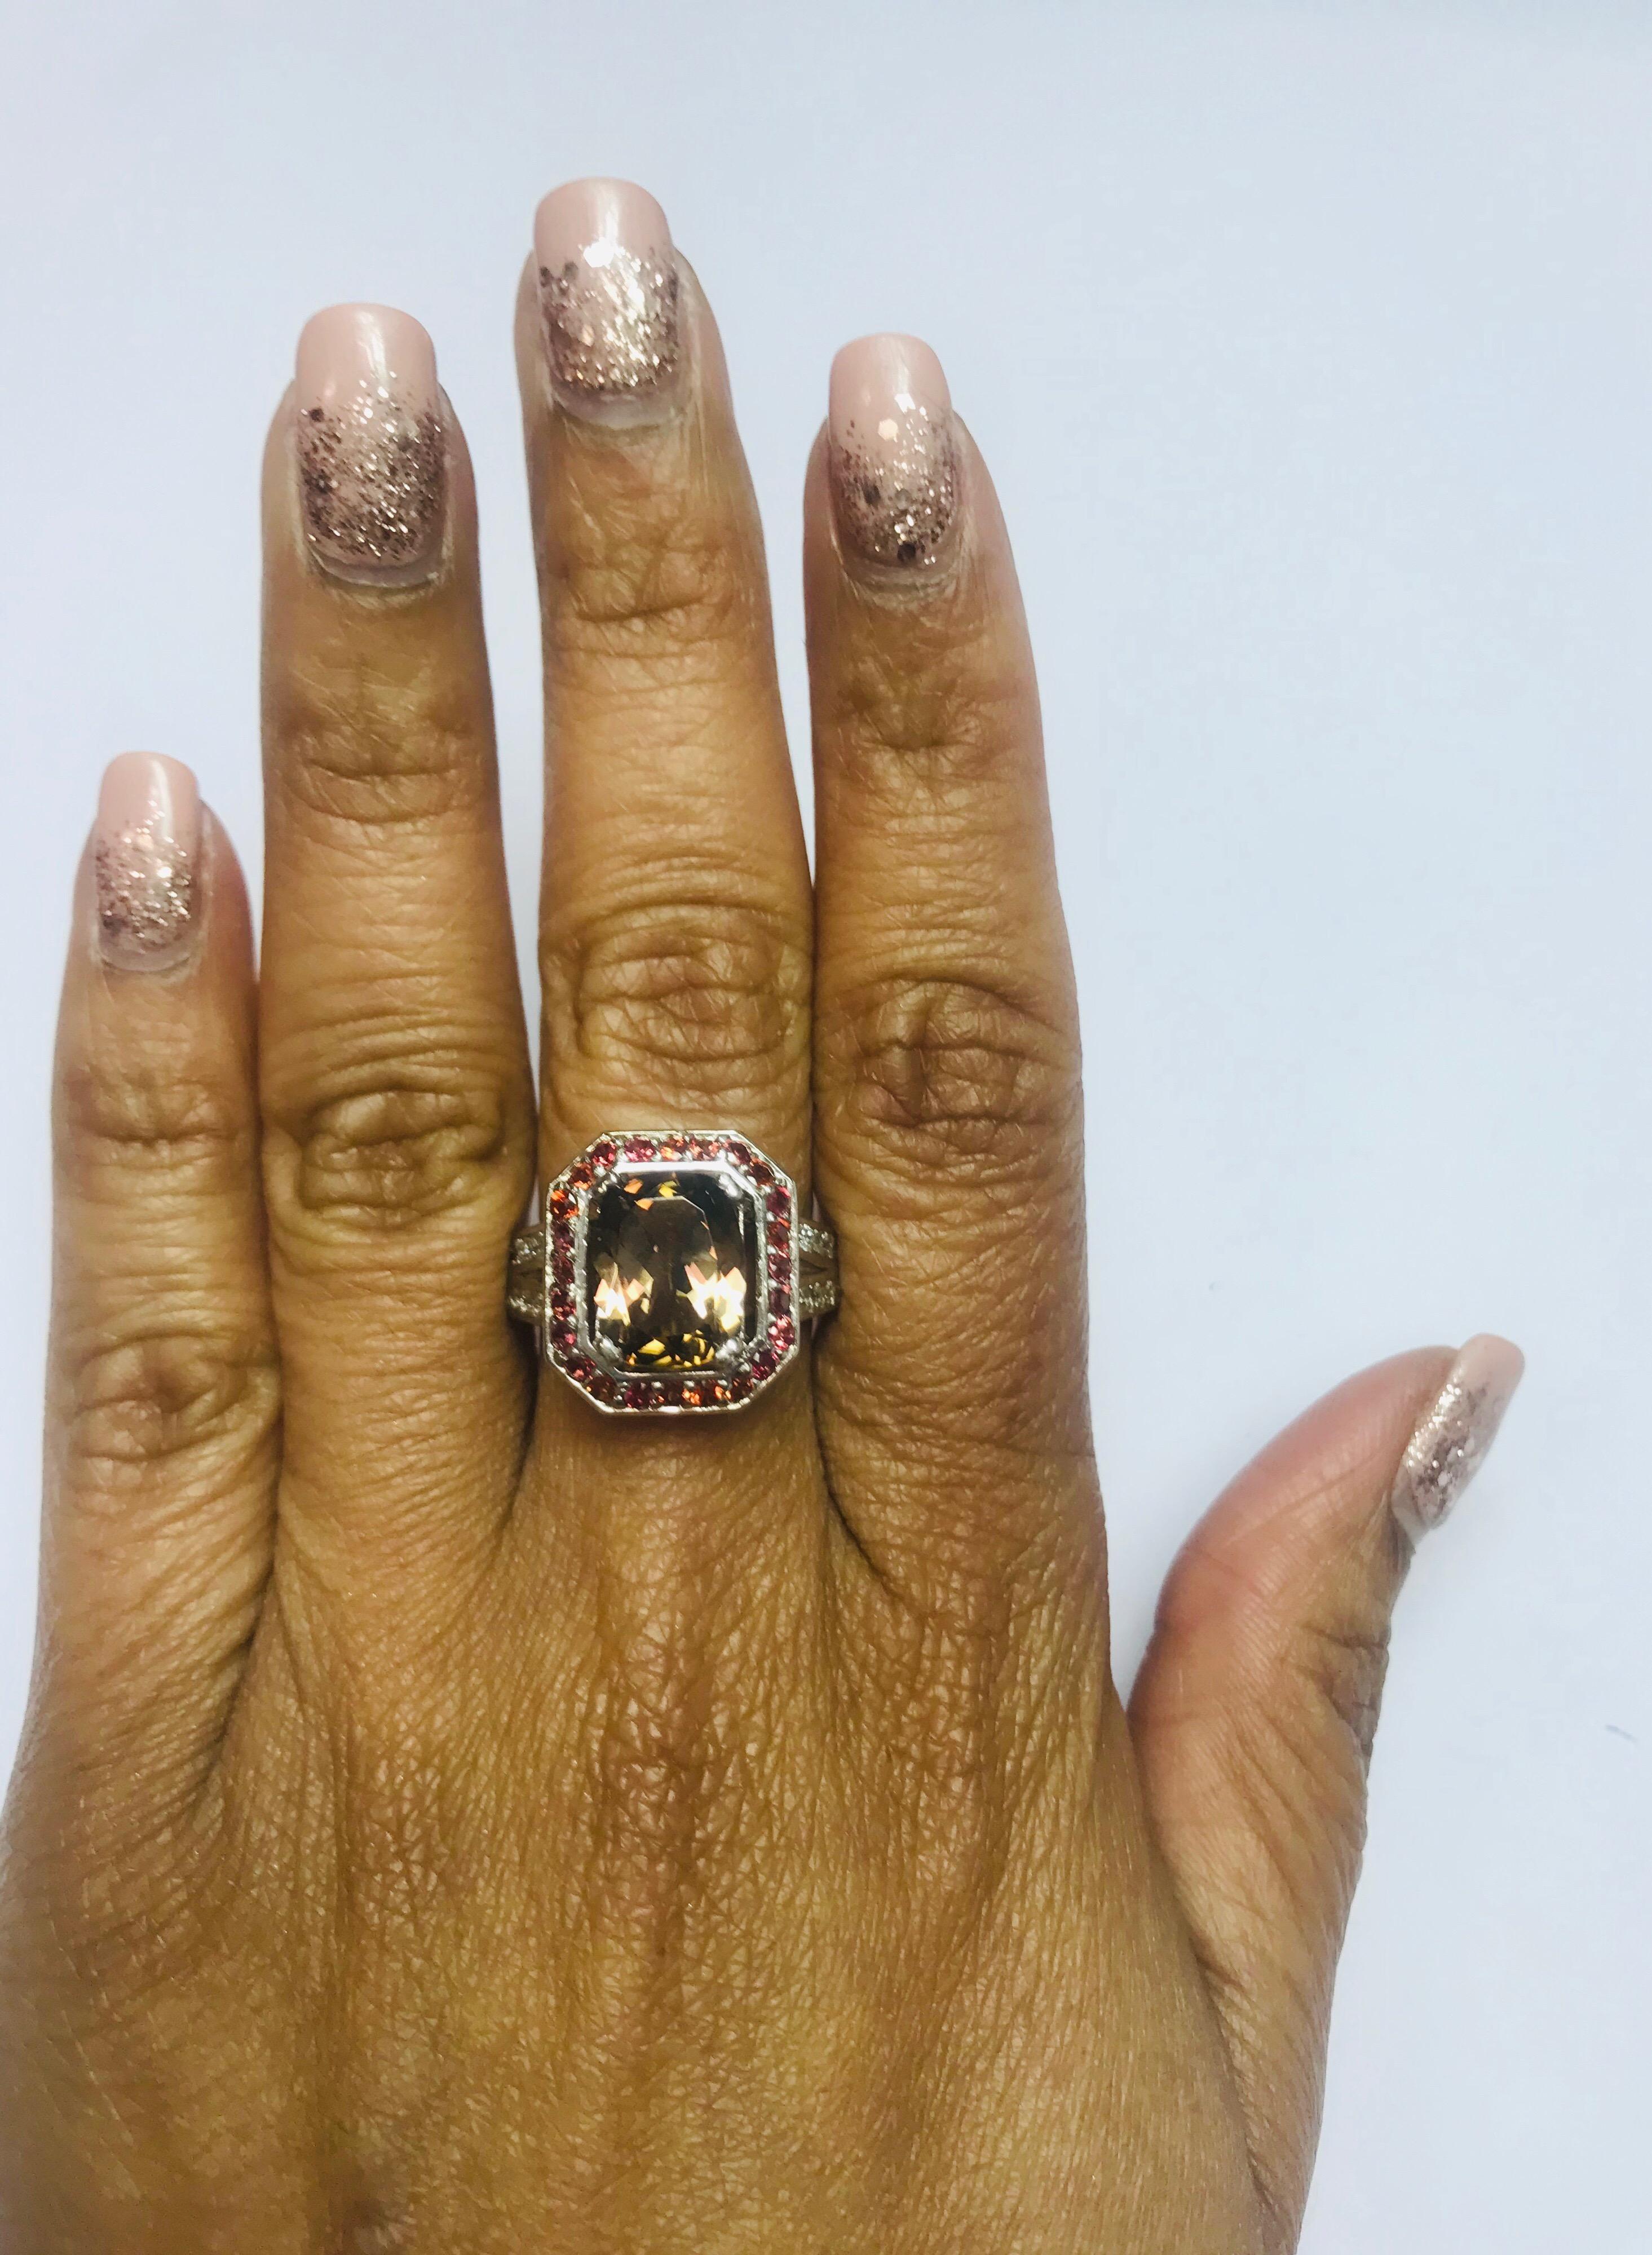 Wow! Beautiful and Unique Tourmaline Ring in a gorgeous White Gold Setting.

This ring has a Oval-Cushion Cut Brown Tourmaline that weighs 3.09 Carats. Floating around the tourmaline are 25 Round Cut Diamonds in a halo weighing 0.71 Carats. Further